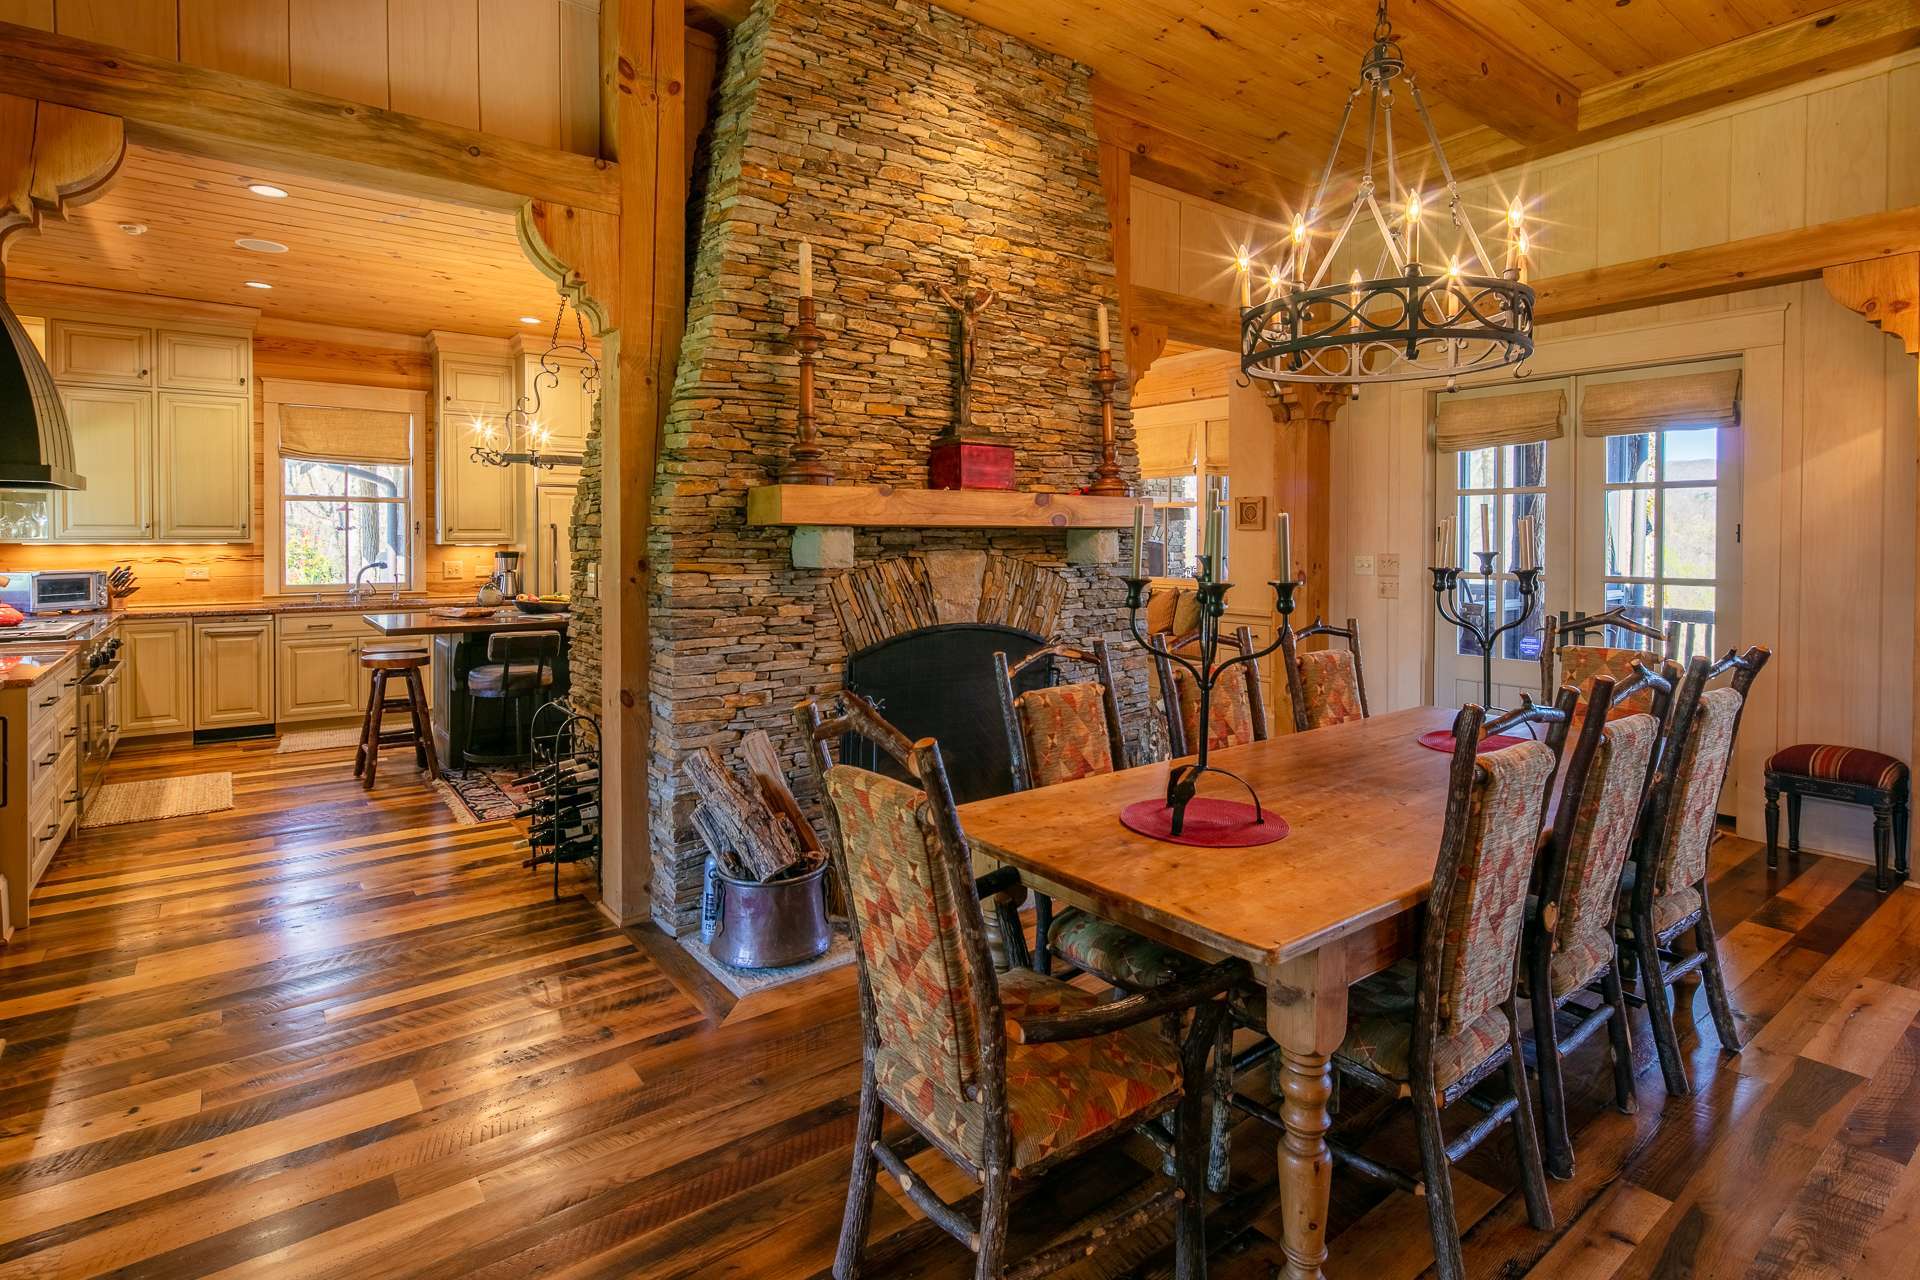 The great room offers formal dining by the fireplace as well as a nook featuring a unique vaulted ceiling.